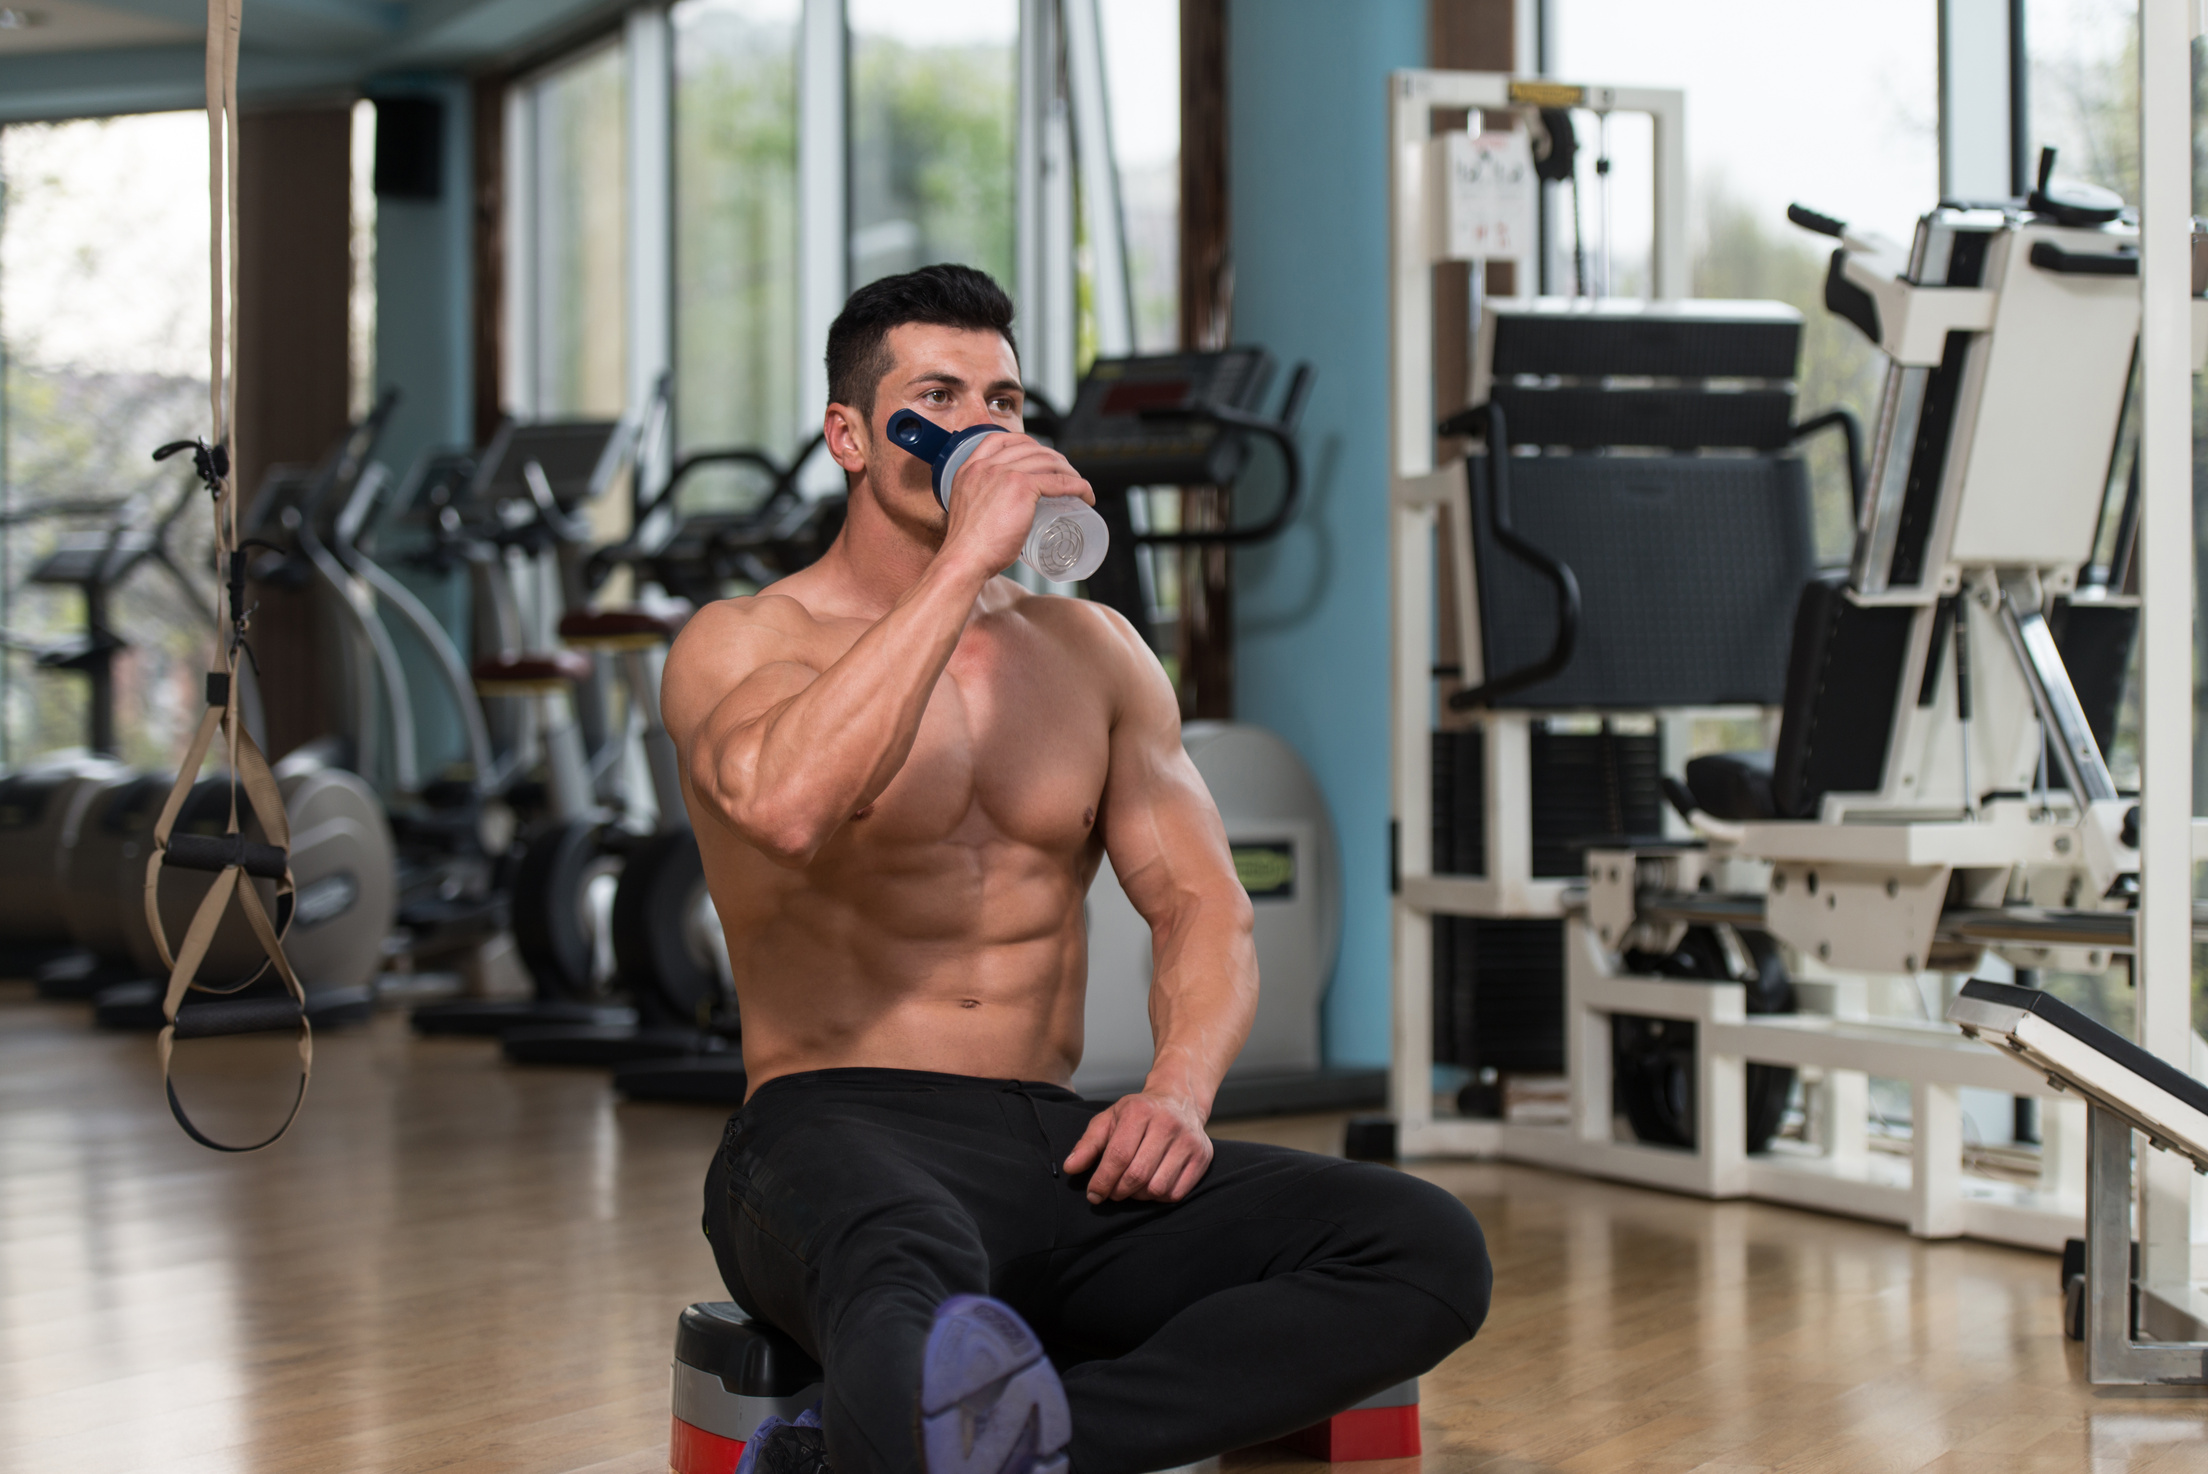 Body builder Drinking Water From Shaker